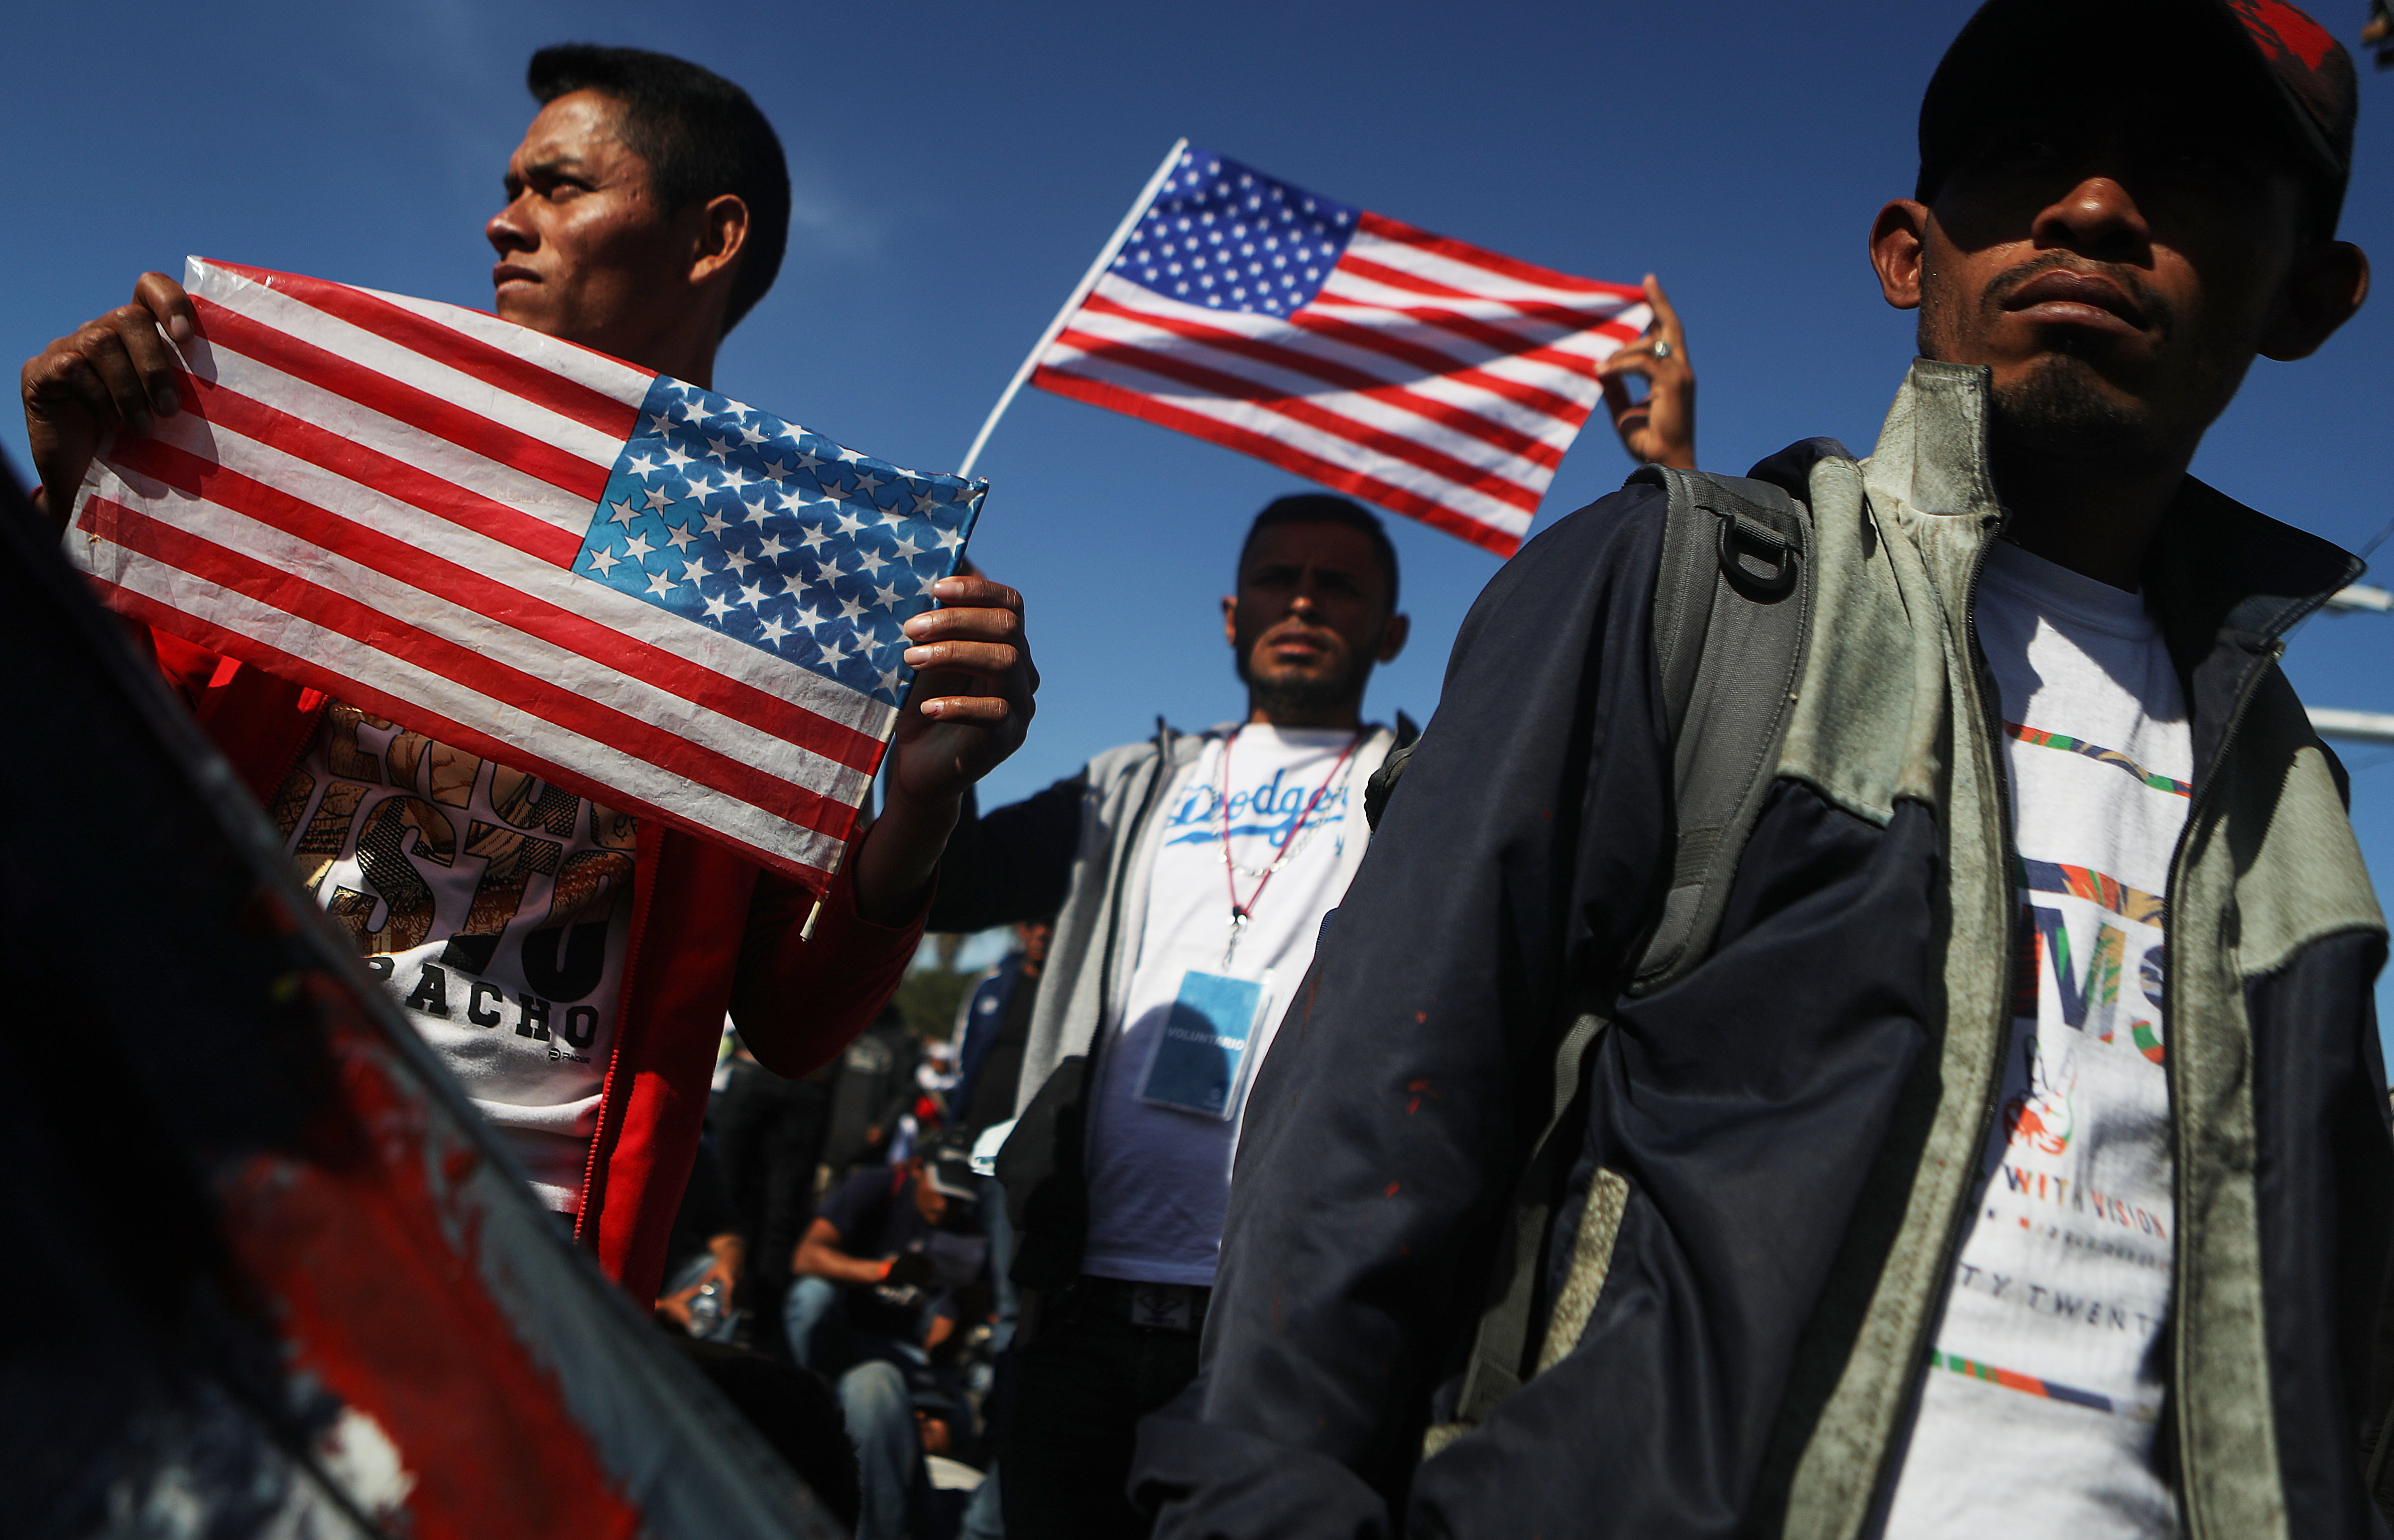 TIJUANA, MEXICO - NOVEMBER 25: Migrants hold American flags during a peaceful march shortly before some evaded a police blockade and rushed toward the El Chaparral port of entry on November 25, 2018 in Tijuana, Mexico. U.S. Customs and Border Protection temporarily closed the two ports of entry on the border with Tijuana in response. Around 6,000 migrants from Central America have arrived in the city with the mayor of Tijuana declaring the situation a 'humanitarian crisis'. (Photo by Mario Tama/Getty Images)